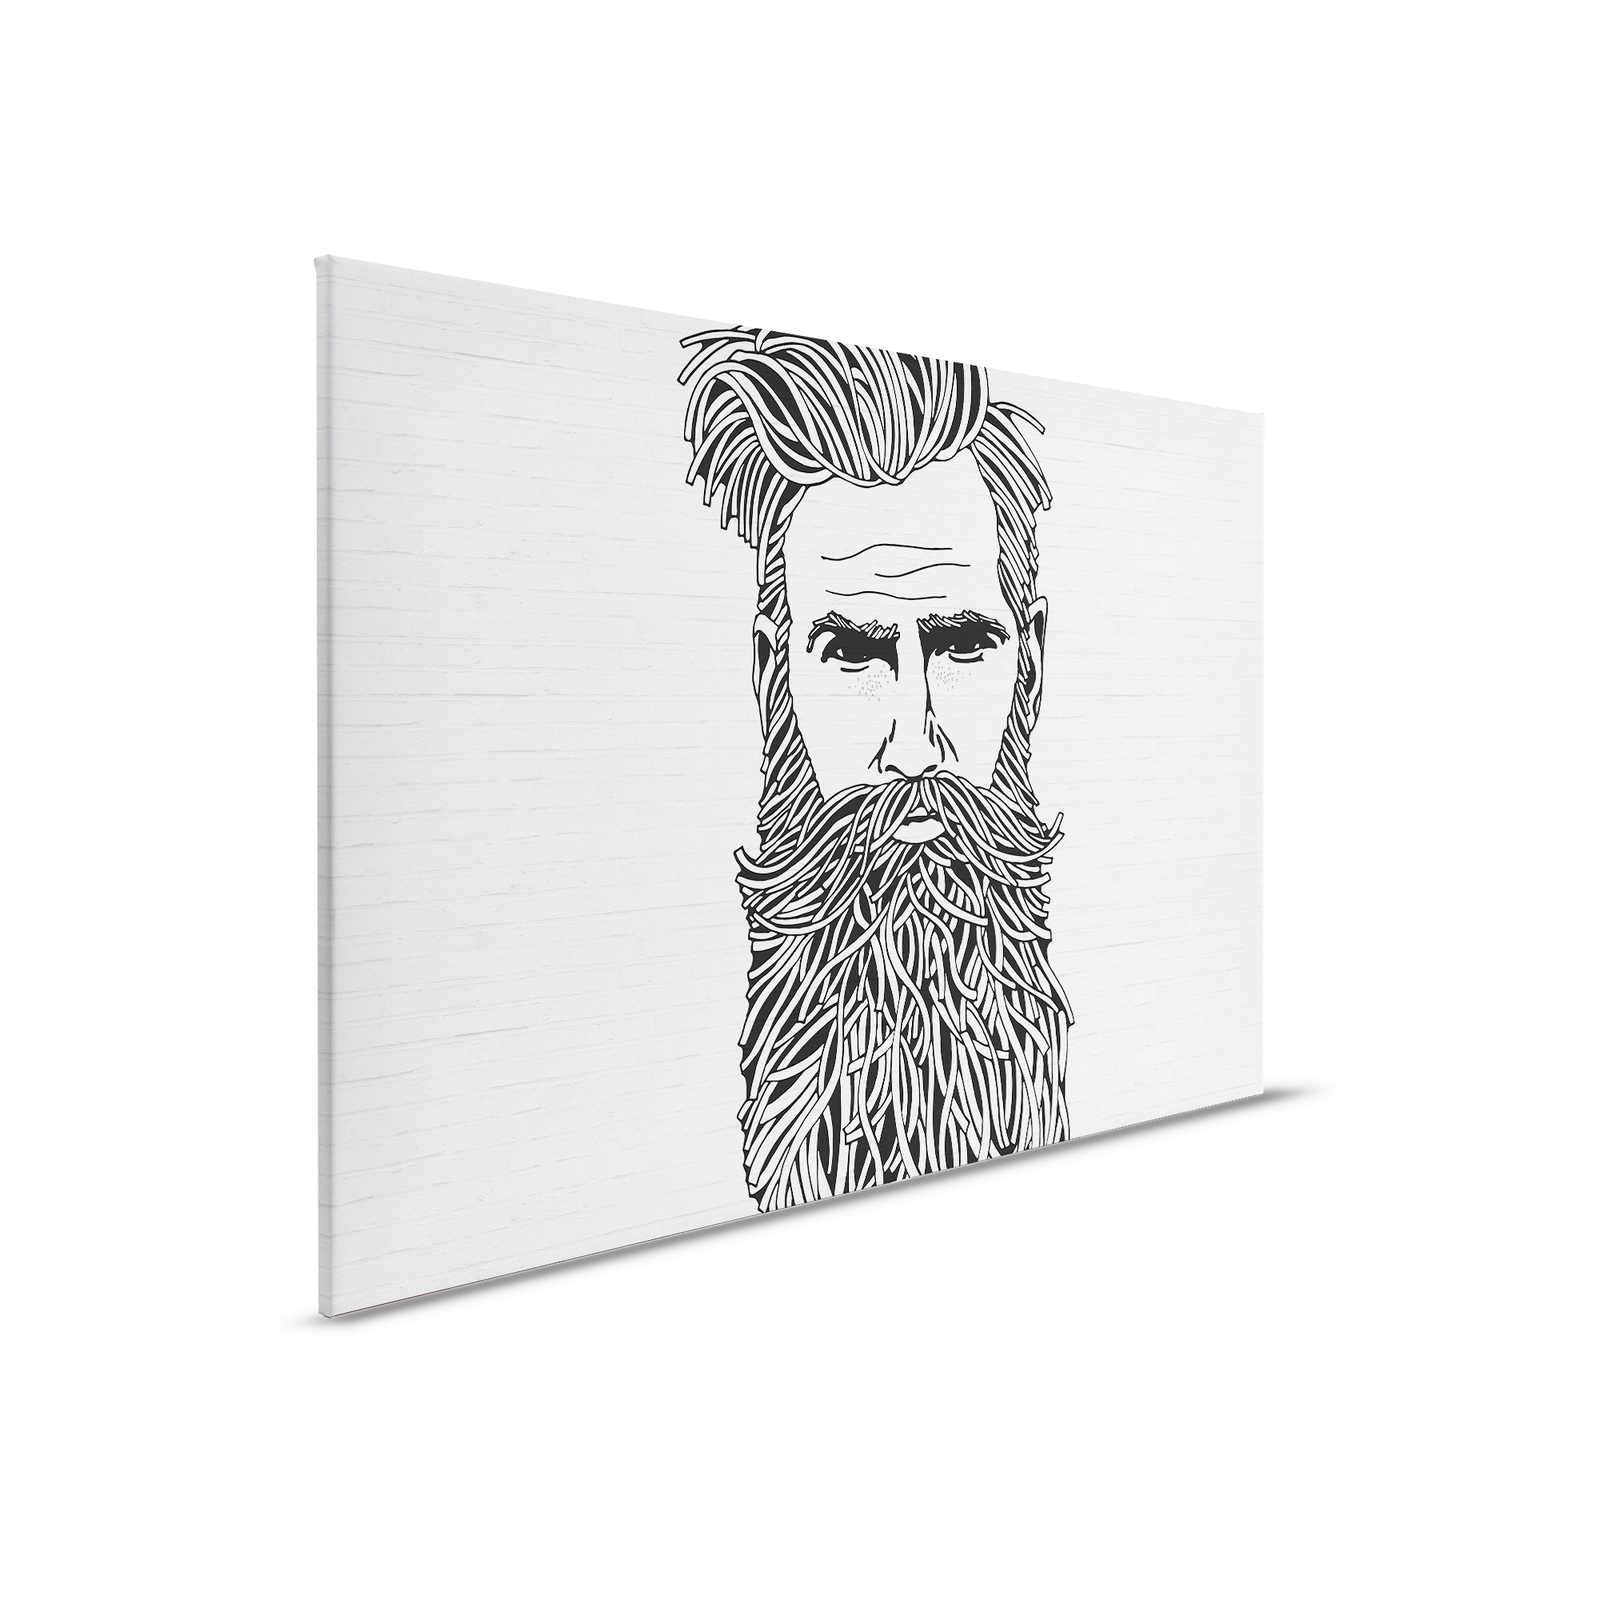 White Canvas Painting Stone Look with Men Portrait in Drawing Style - 0.90 m x 0.60 m
